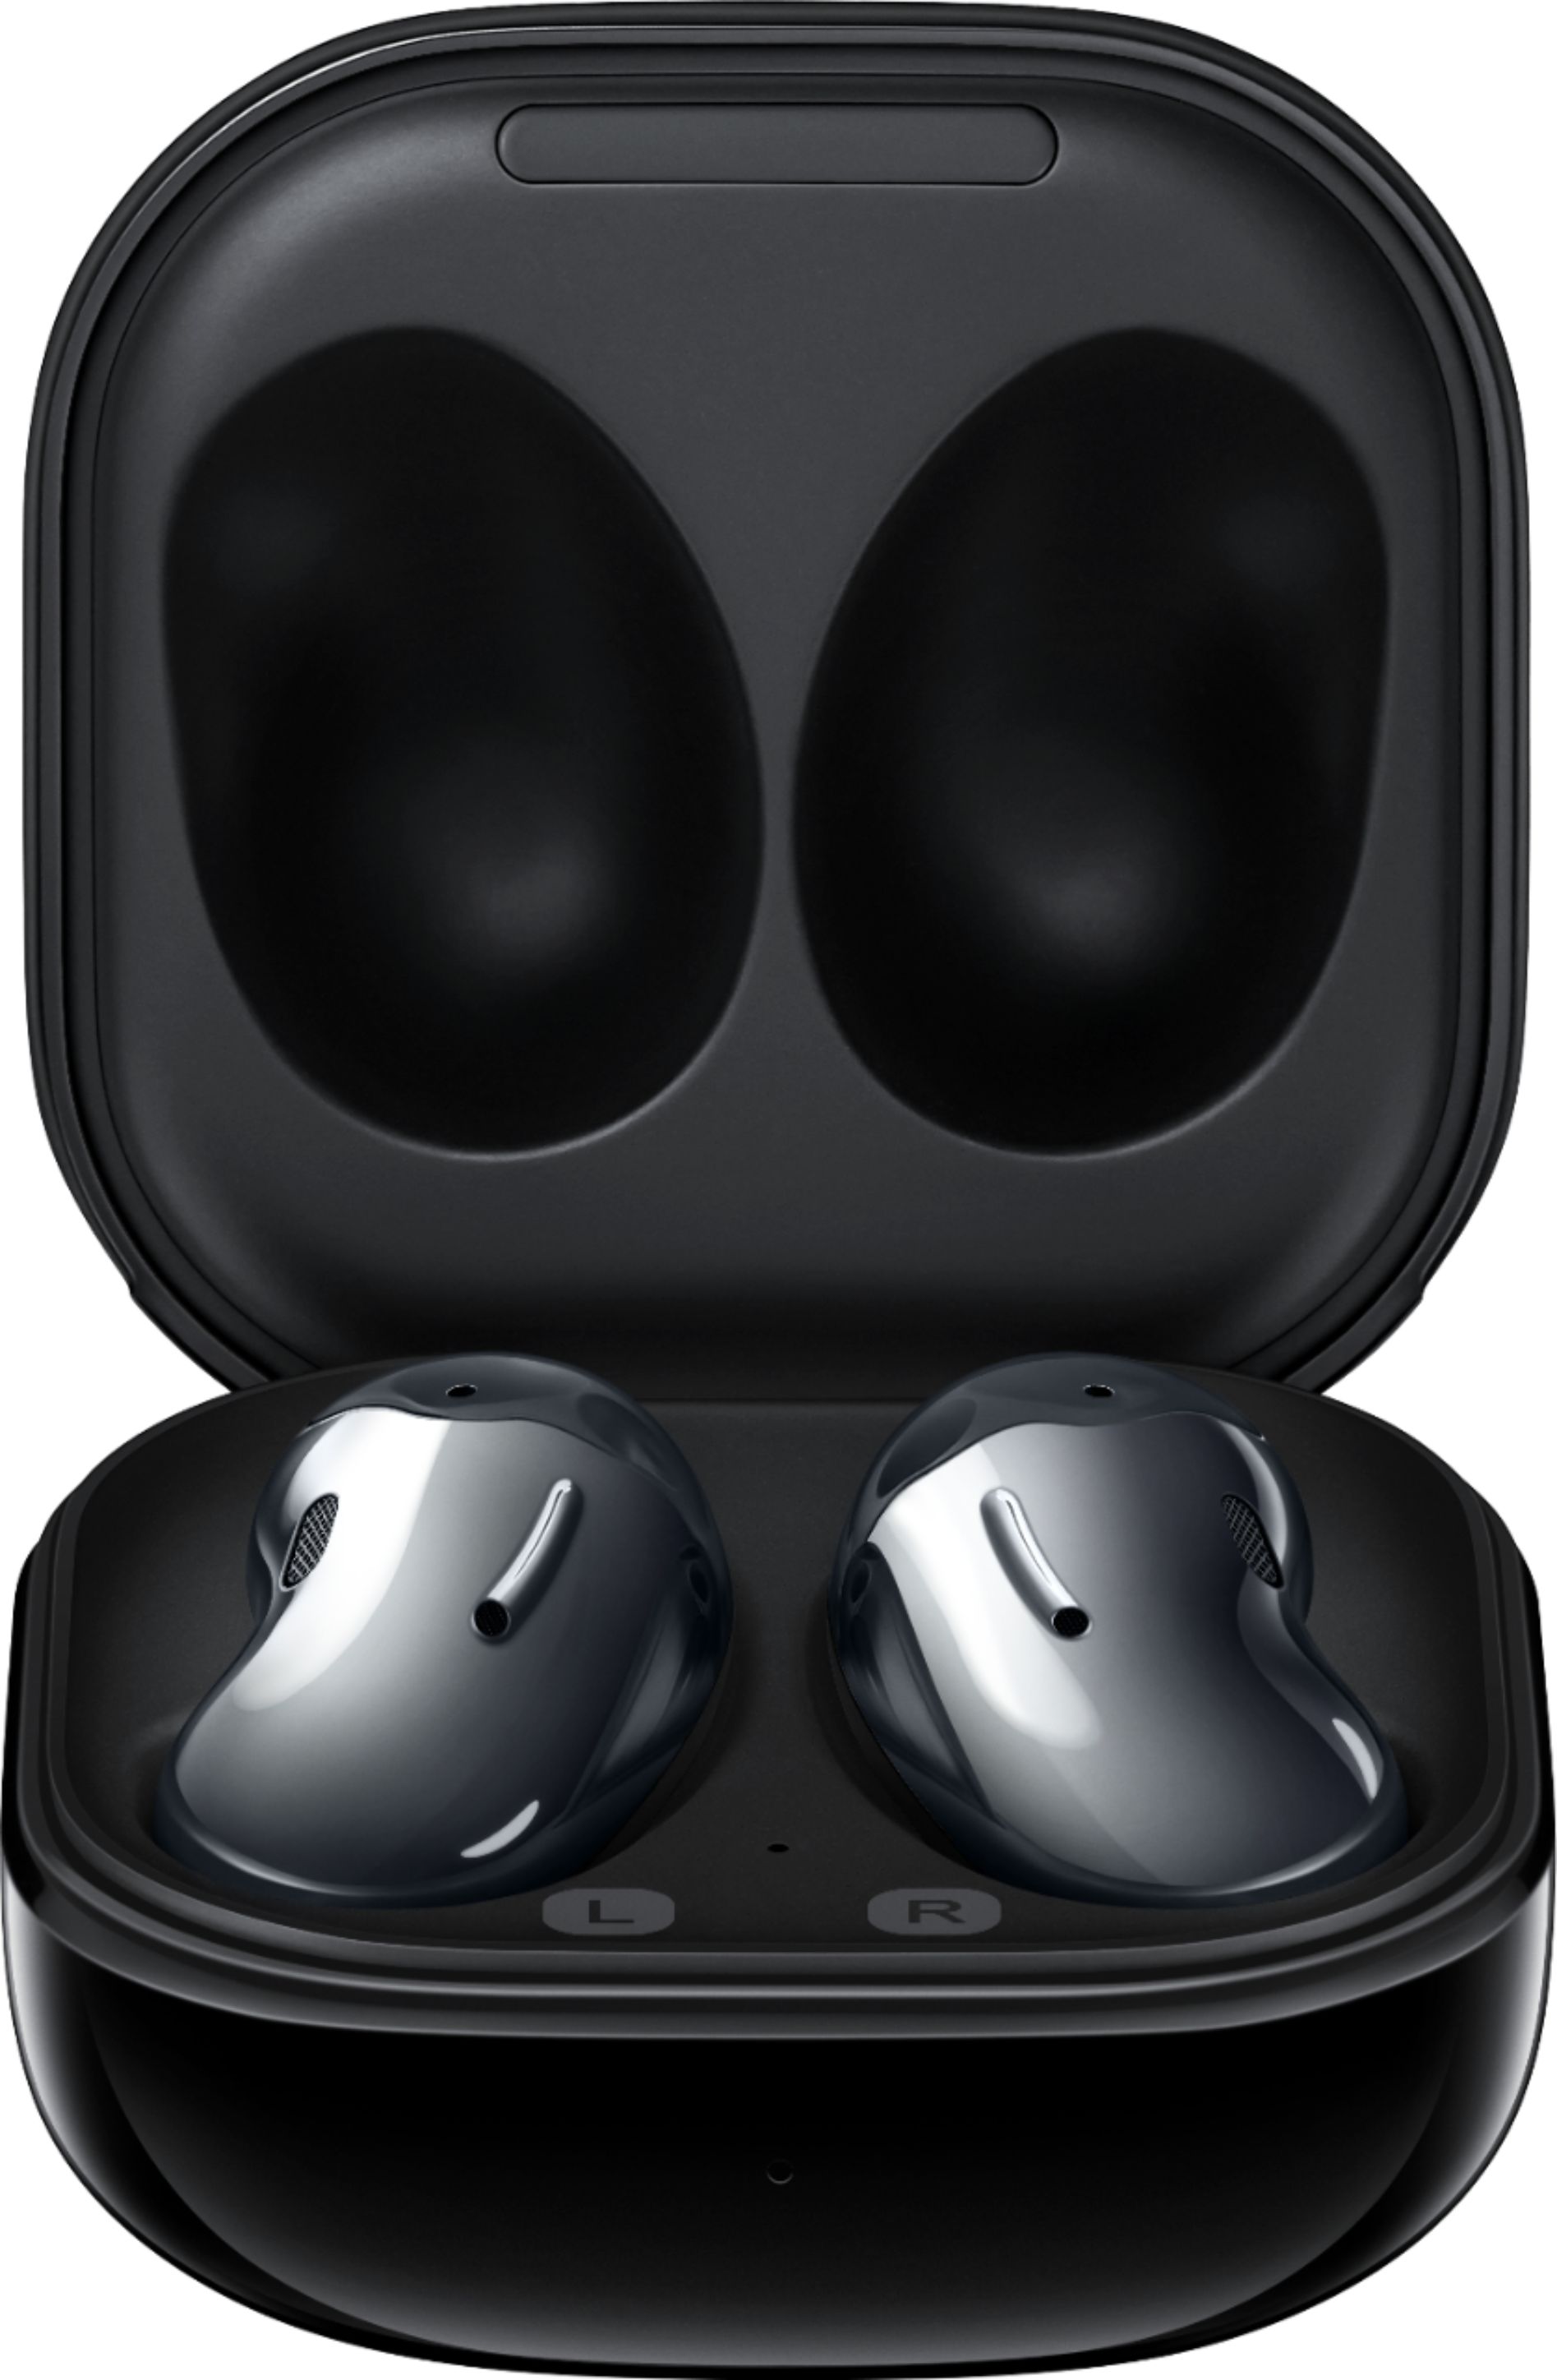 Galaxy Buds Live: save $50 at Best Buy